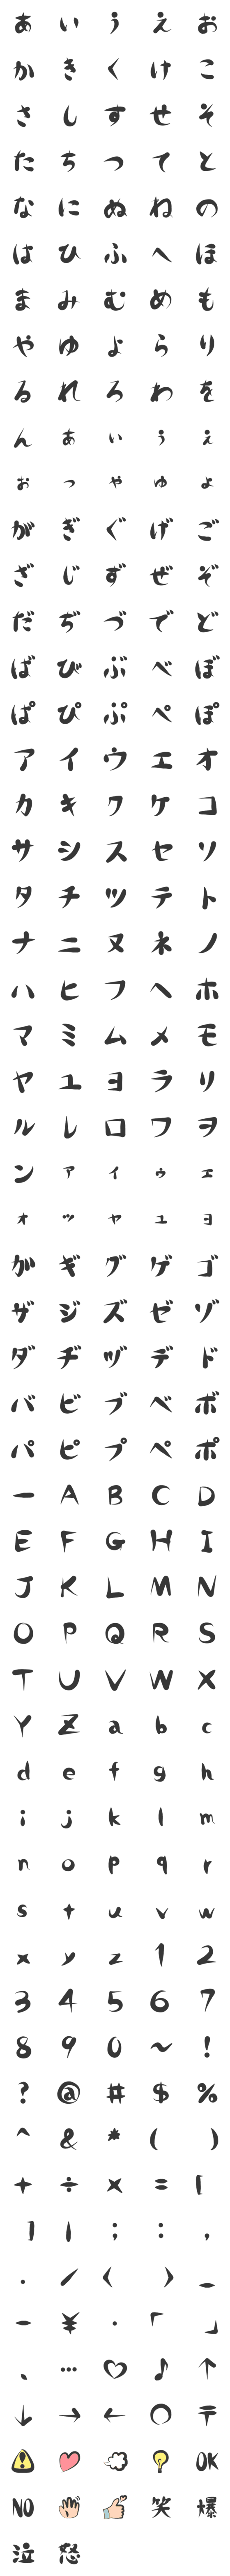 [LINE絵文字]筆文字の絵文字の画像一覧